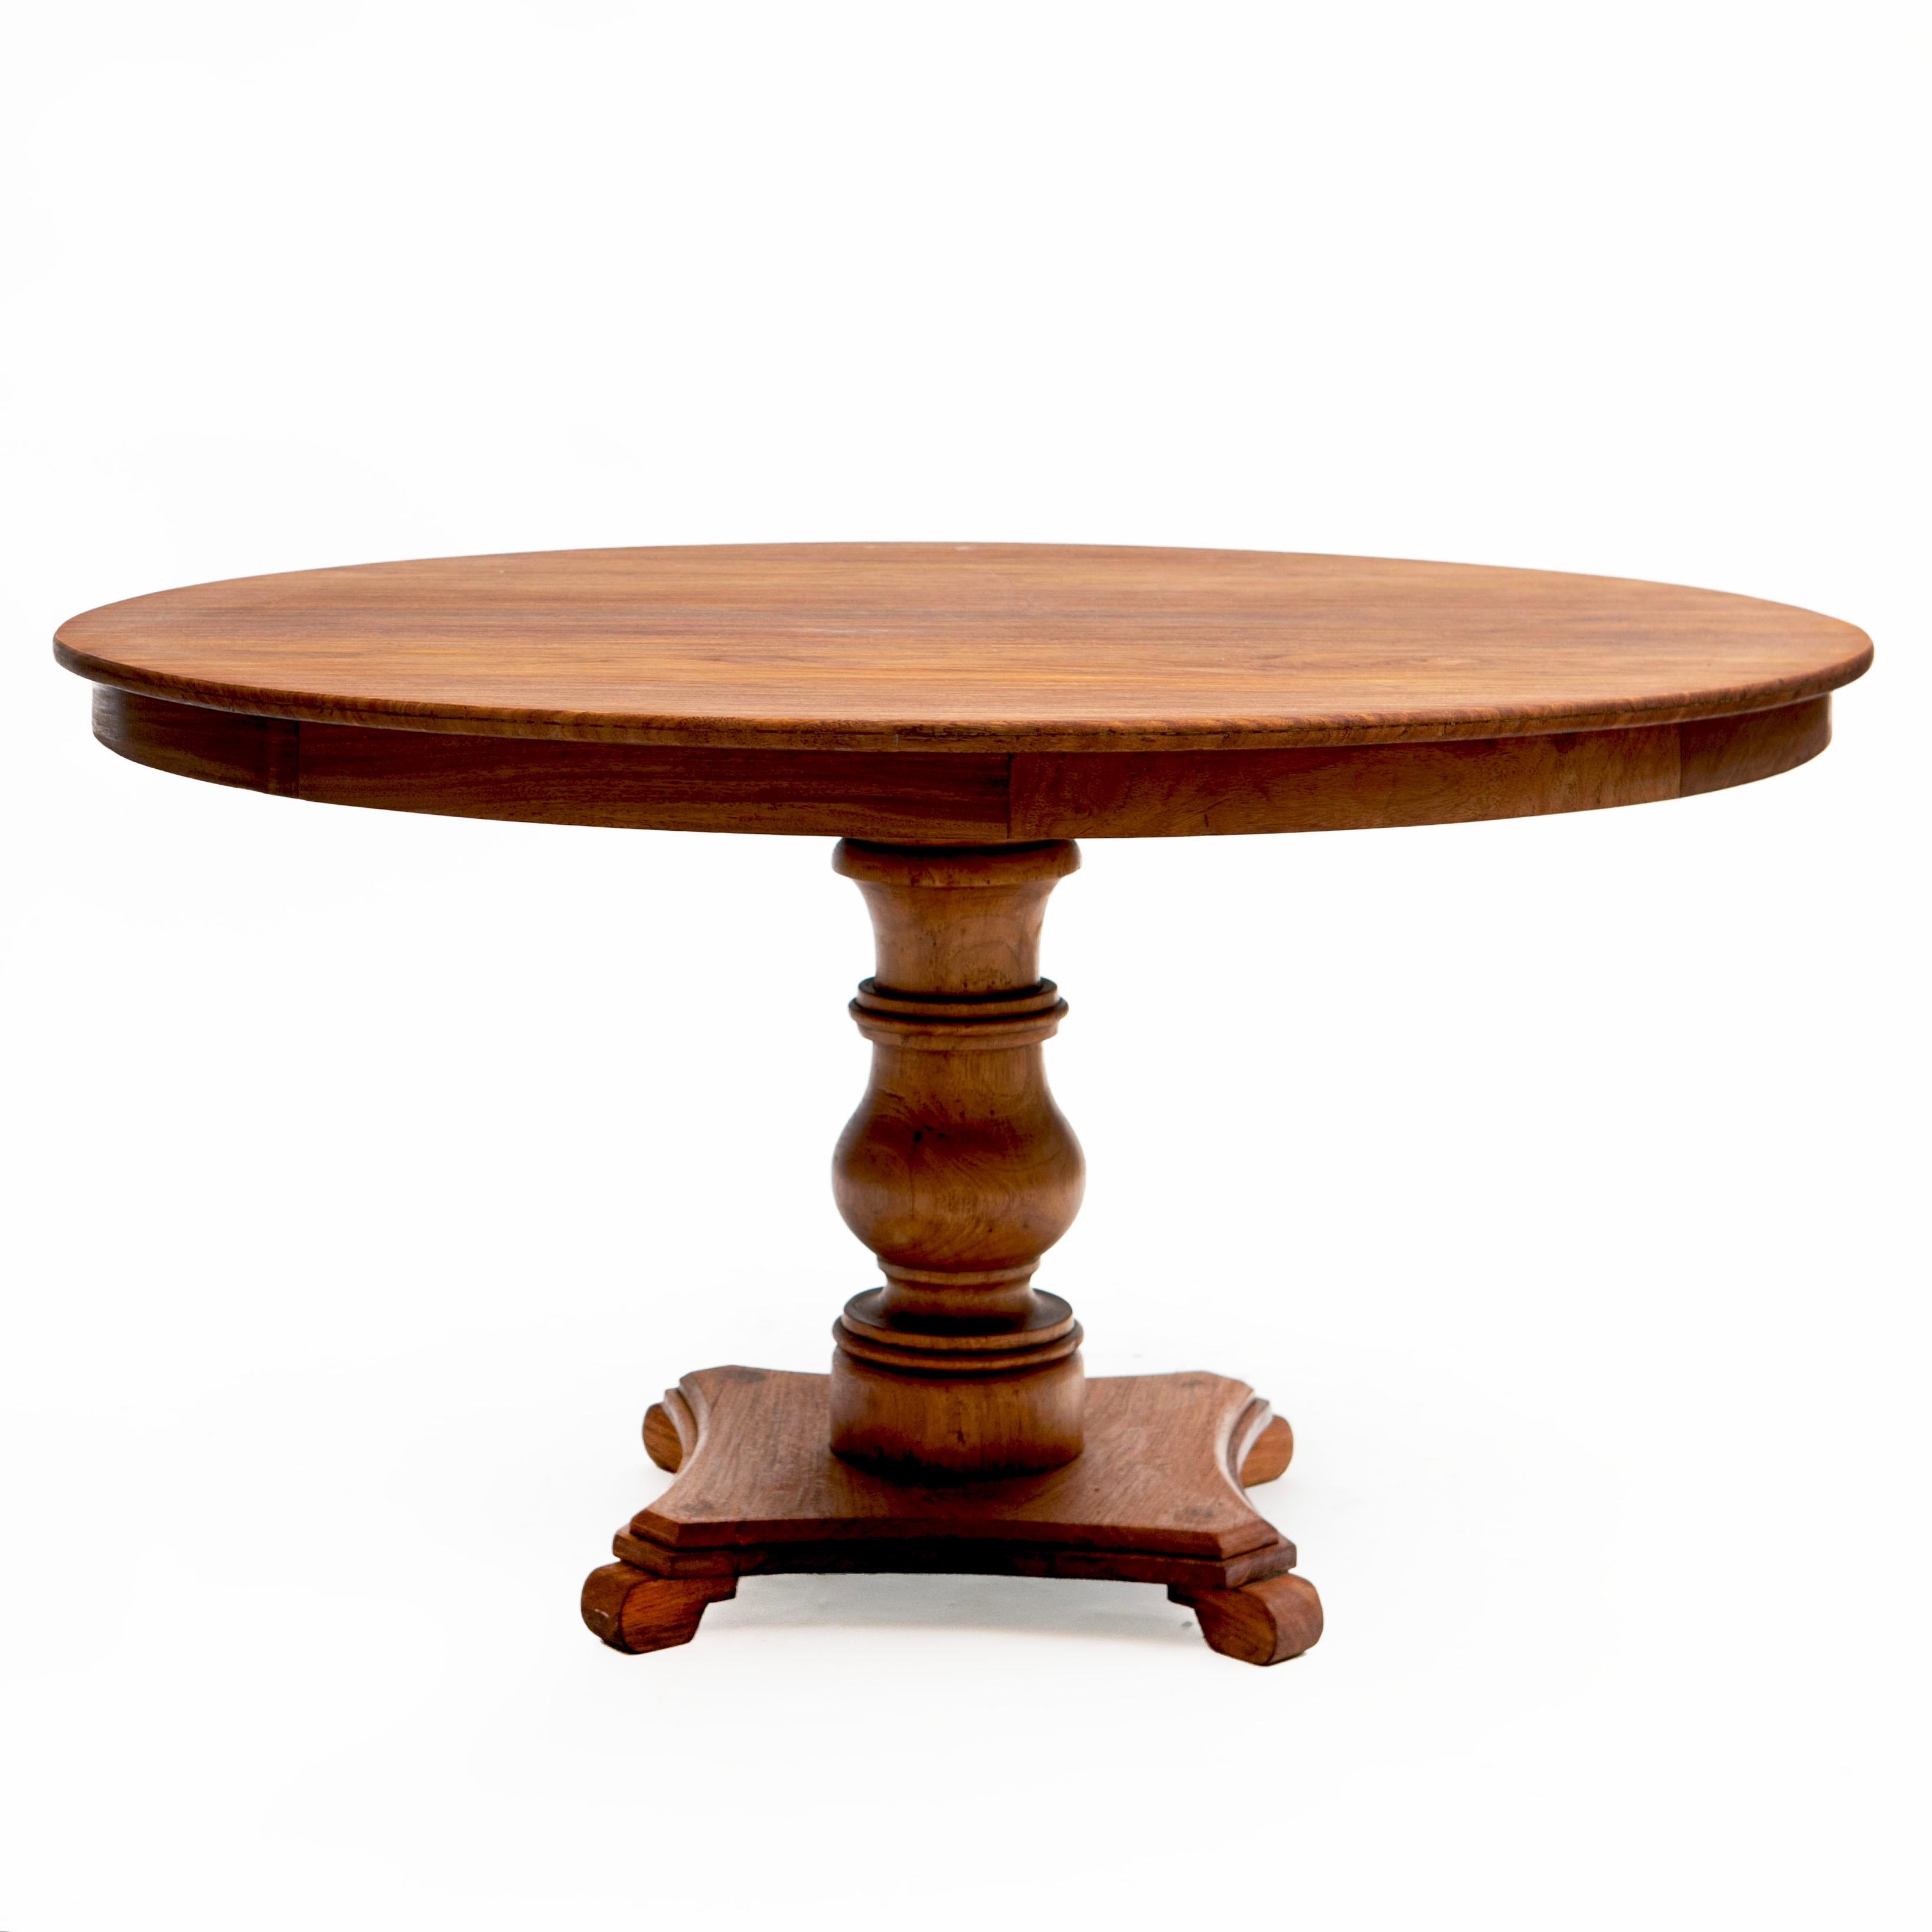 Large round Art Deco dining table crafted in solid Narra hardwood.
The table top is made of one piece of wood and has a diameter of 138 cm.
The Philippines was a Spanish colony in the period 1565-1898 and has a tradition of European-style tables.